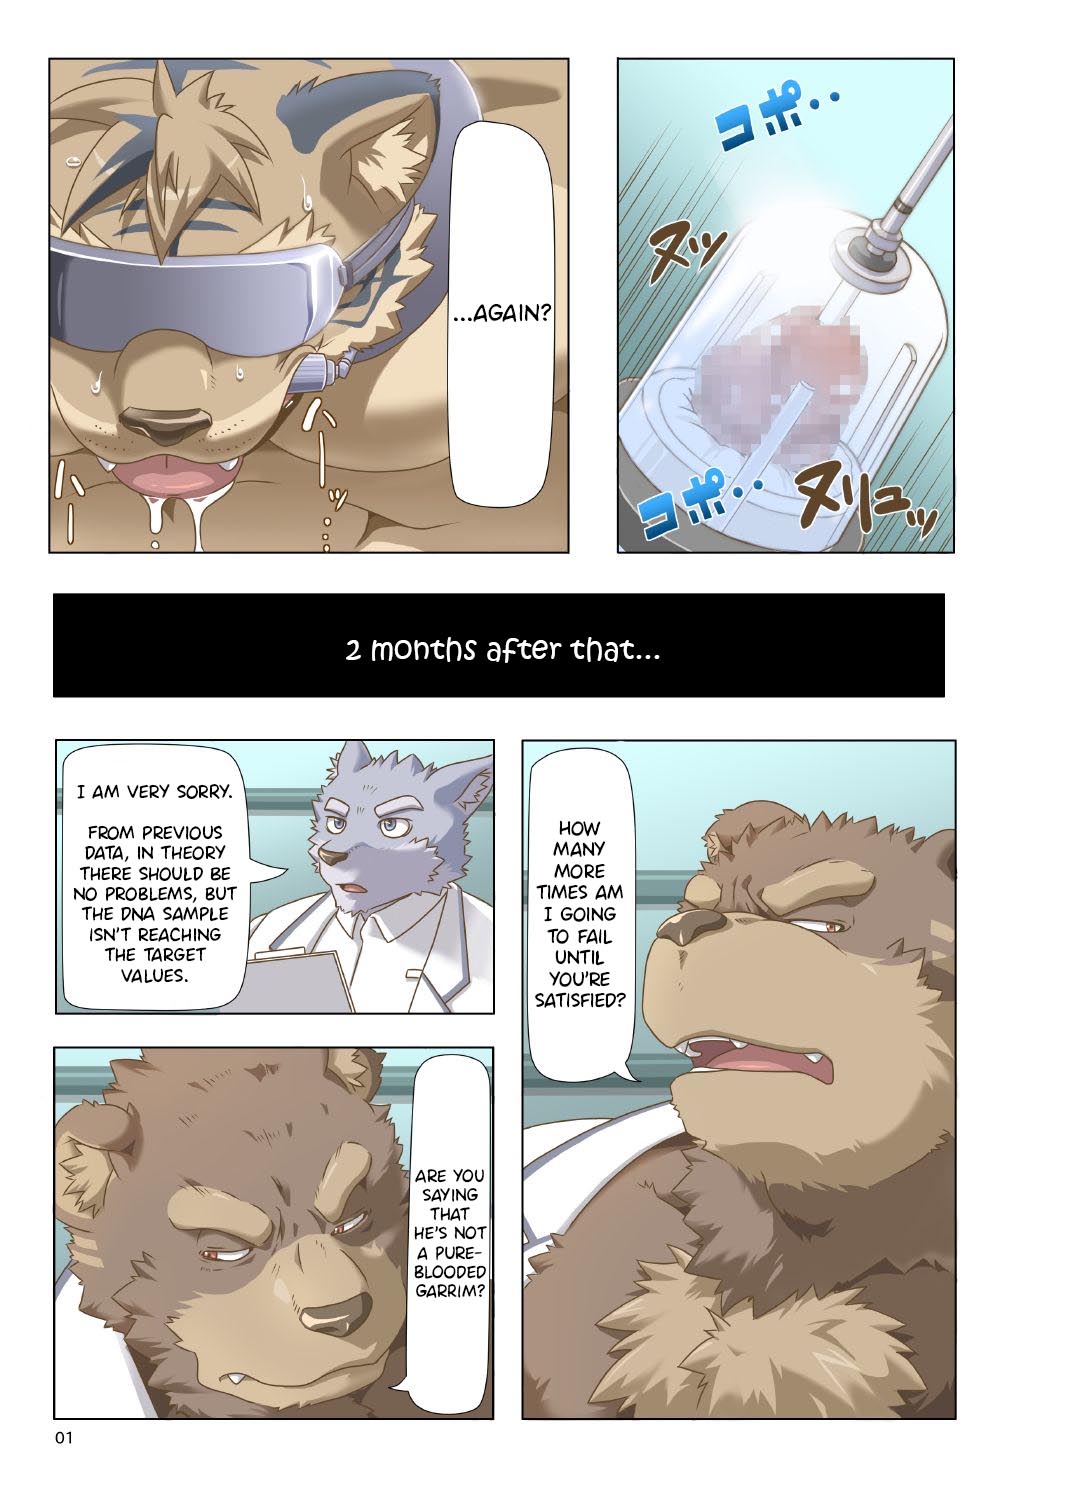 Sacred 3 Porn - Sacred Beast Stone Amber Cube - Page 3 - HentaiEra